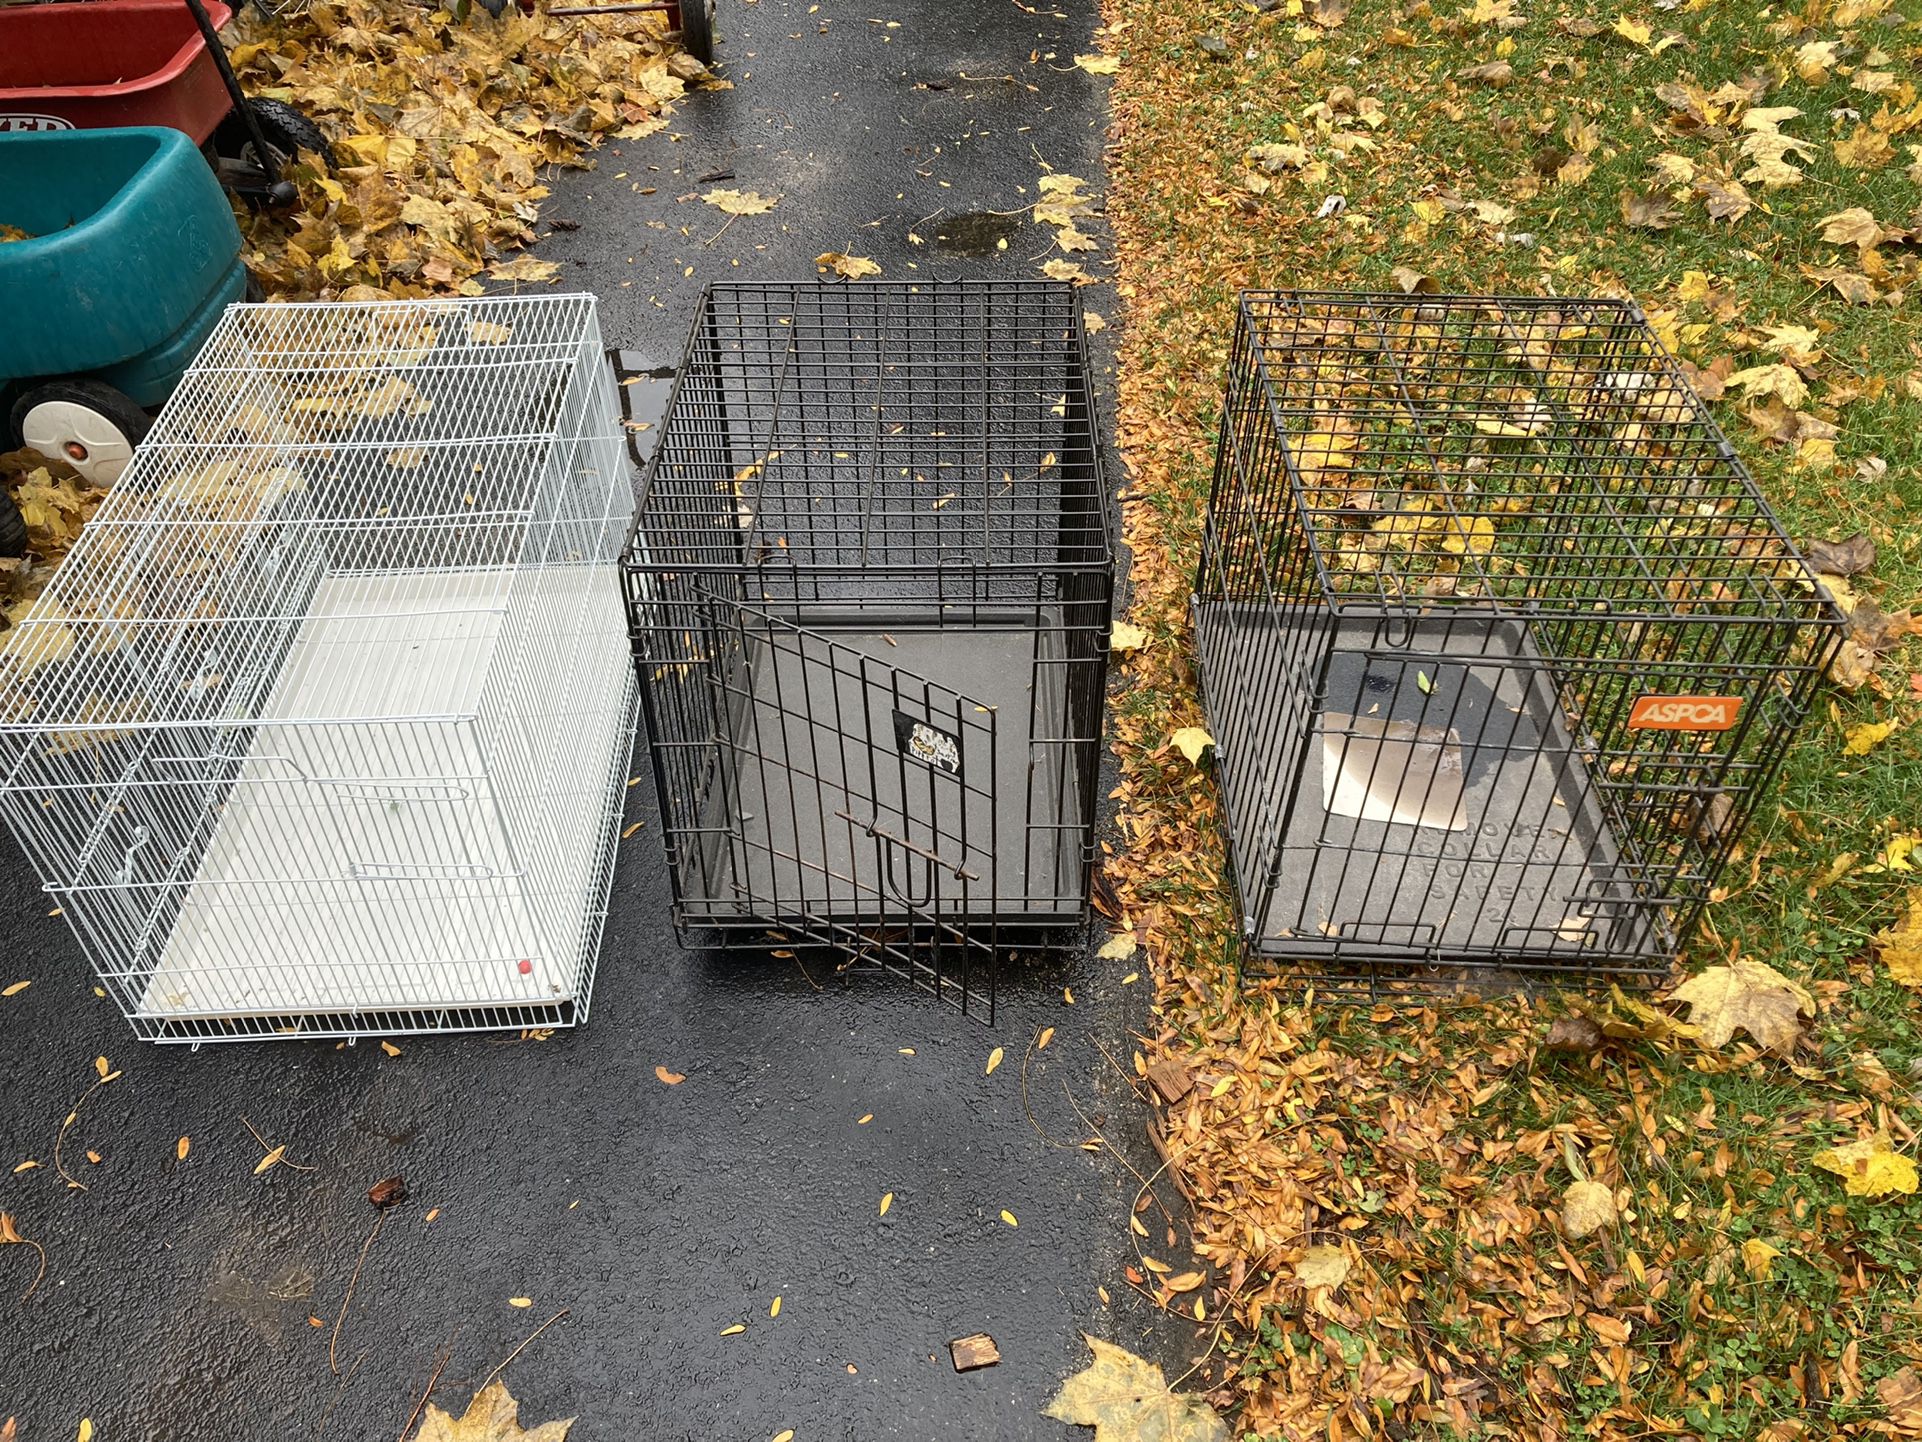 Dog And Bird Cages